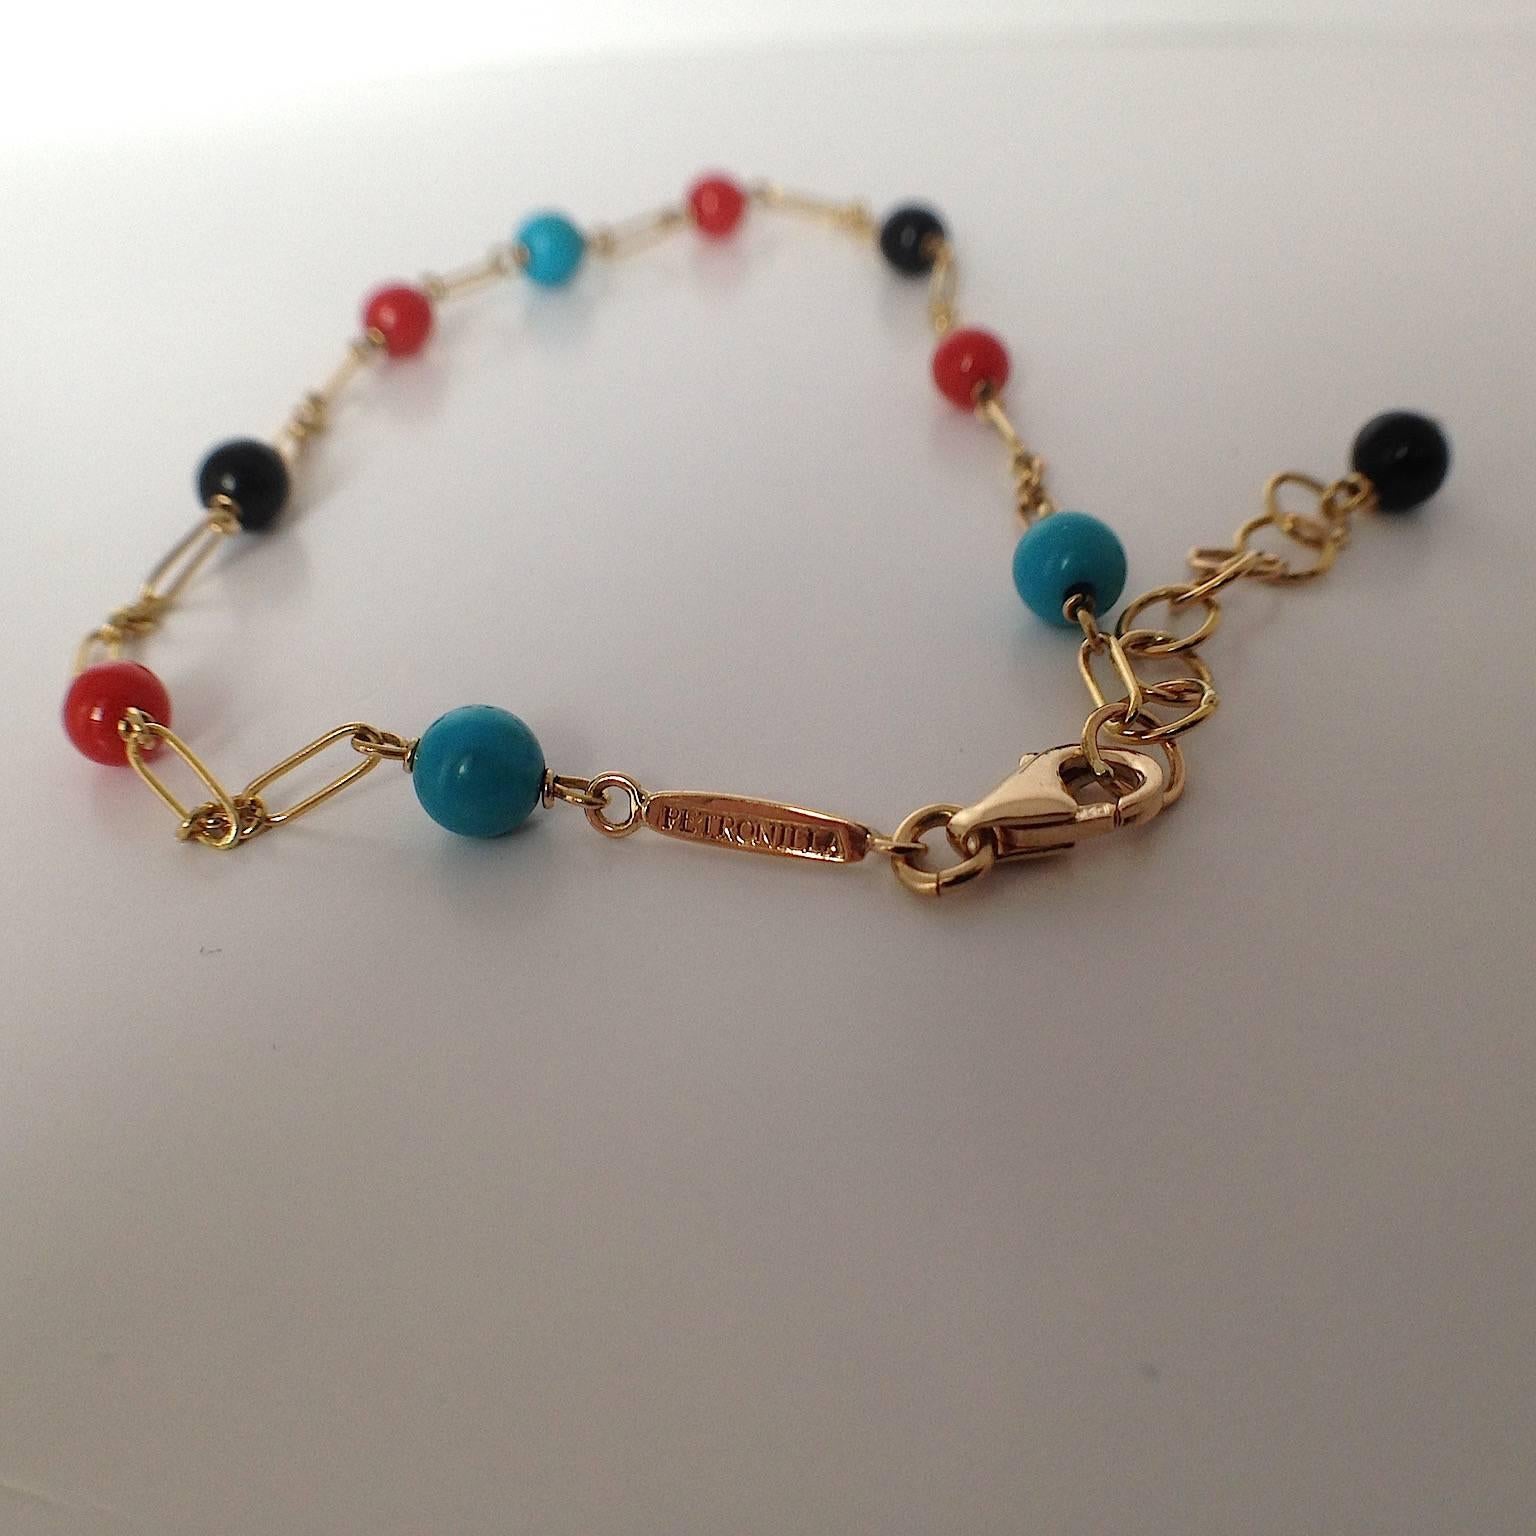 When I think of summer, I think of color and light.
This bracelet is a small sign of summer.
Coral and Turquoise remind me of the beach, the scents and colors of my Italy.

The chain is completely handmade in 18Kt gold and is interspersed with